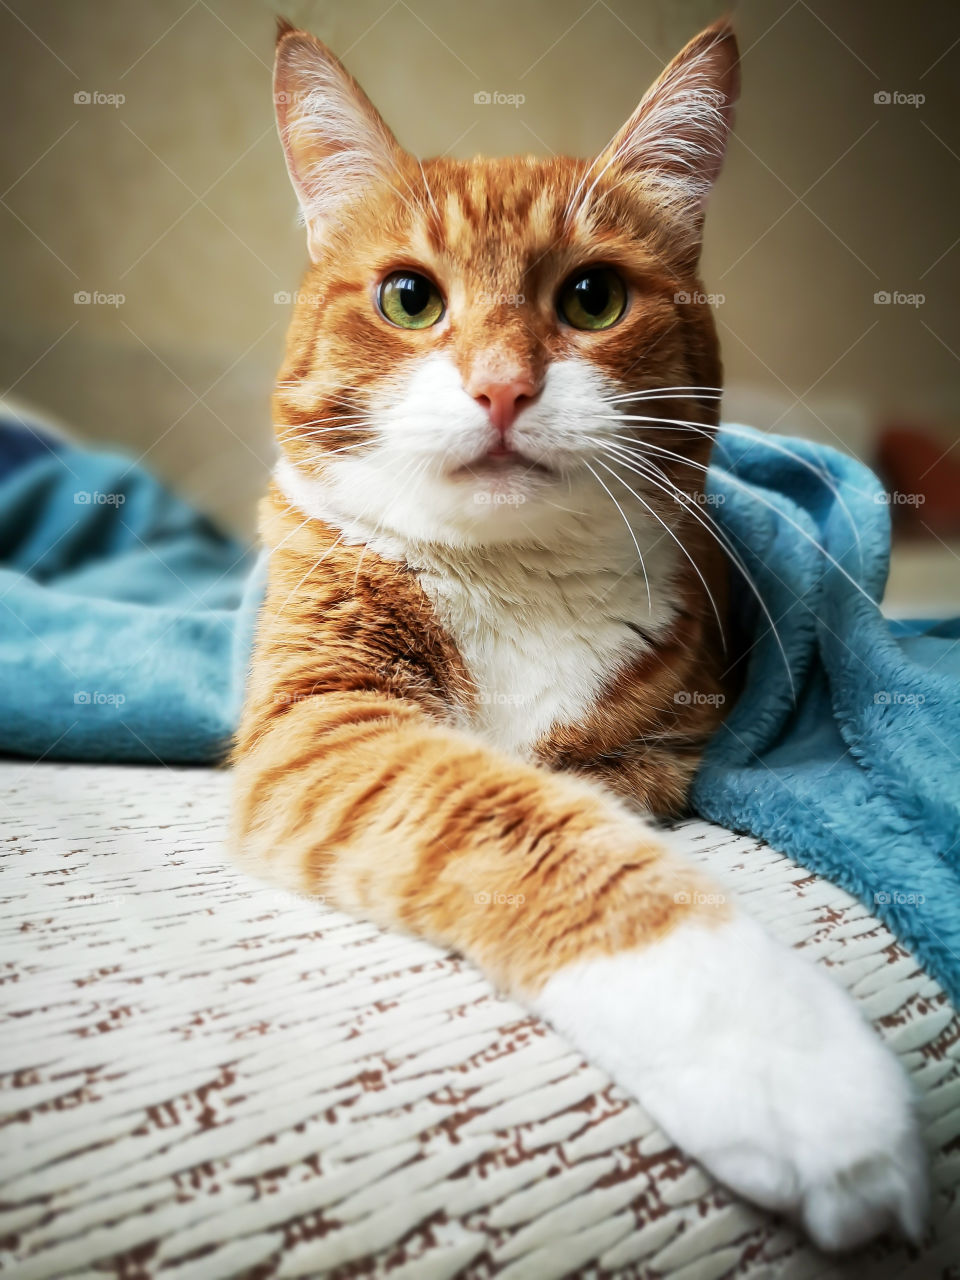 A large beautiful ginger tabby cat imposingly lies on a sofa and looks at the camera.